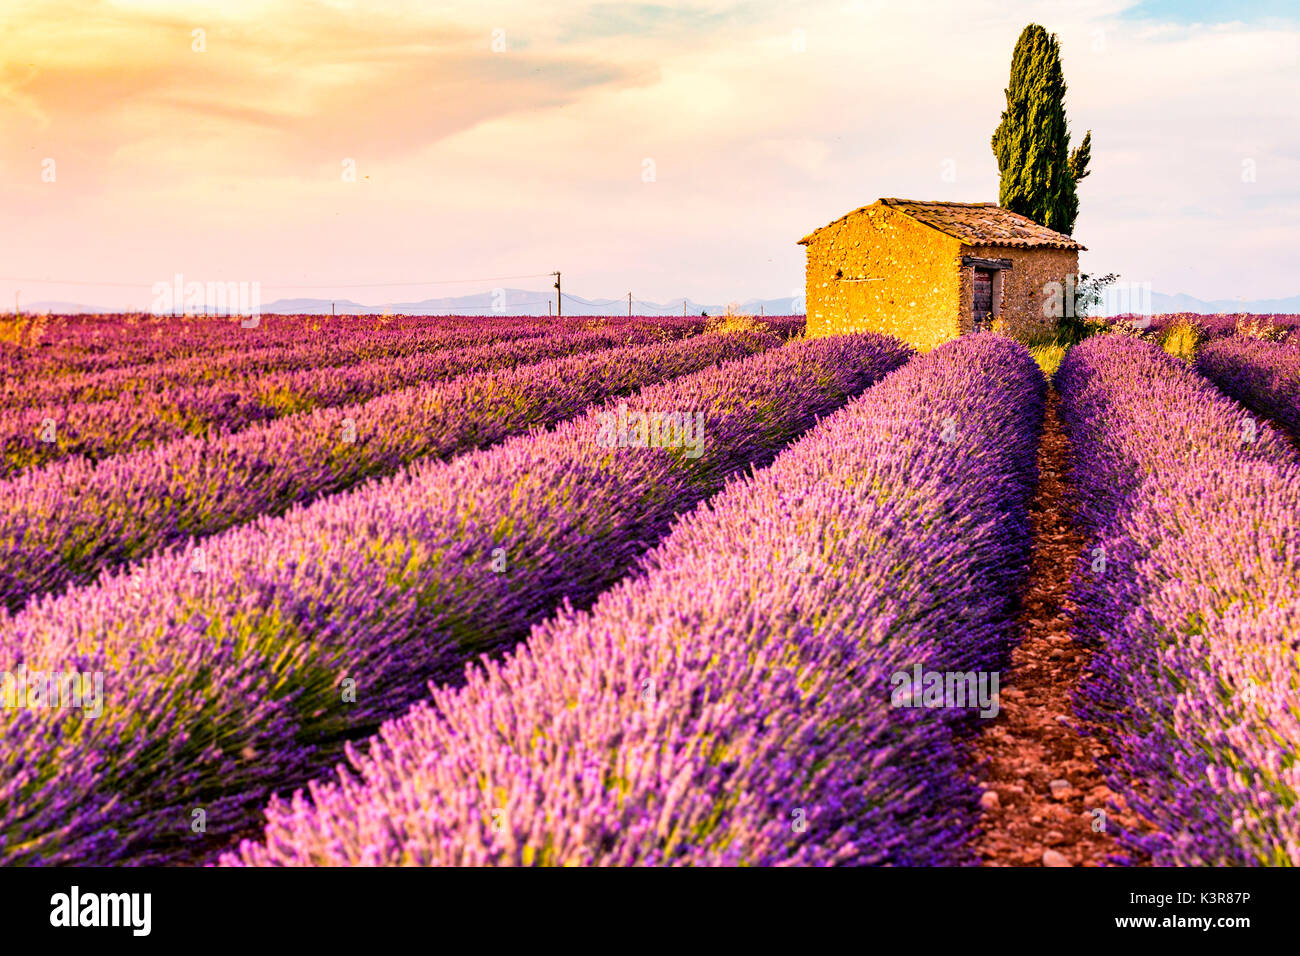 Provence, Valensole Plateau, France, Europe. Lonely farmhouse and cypress tree in a Lavender field in bloom, sunrise with sunburst. Stock Photo